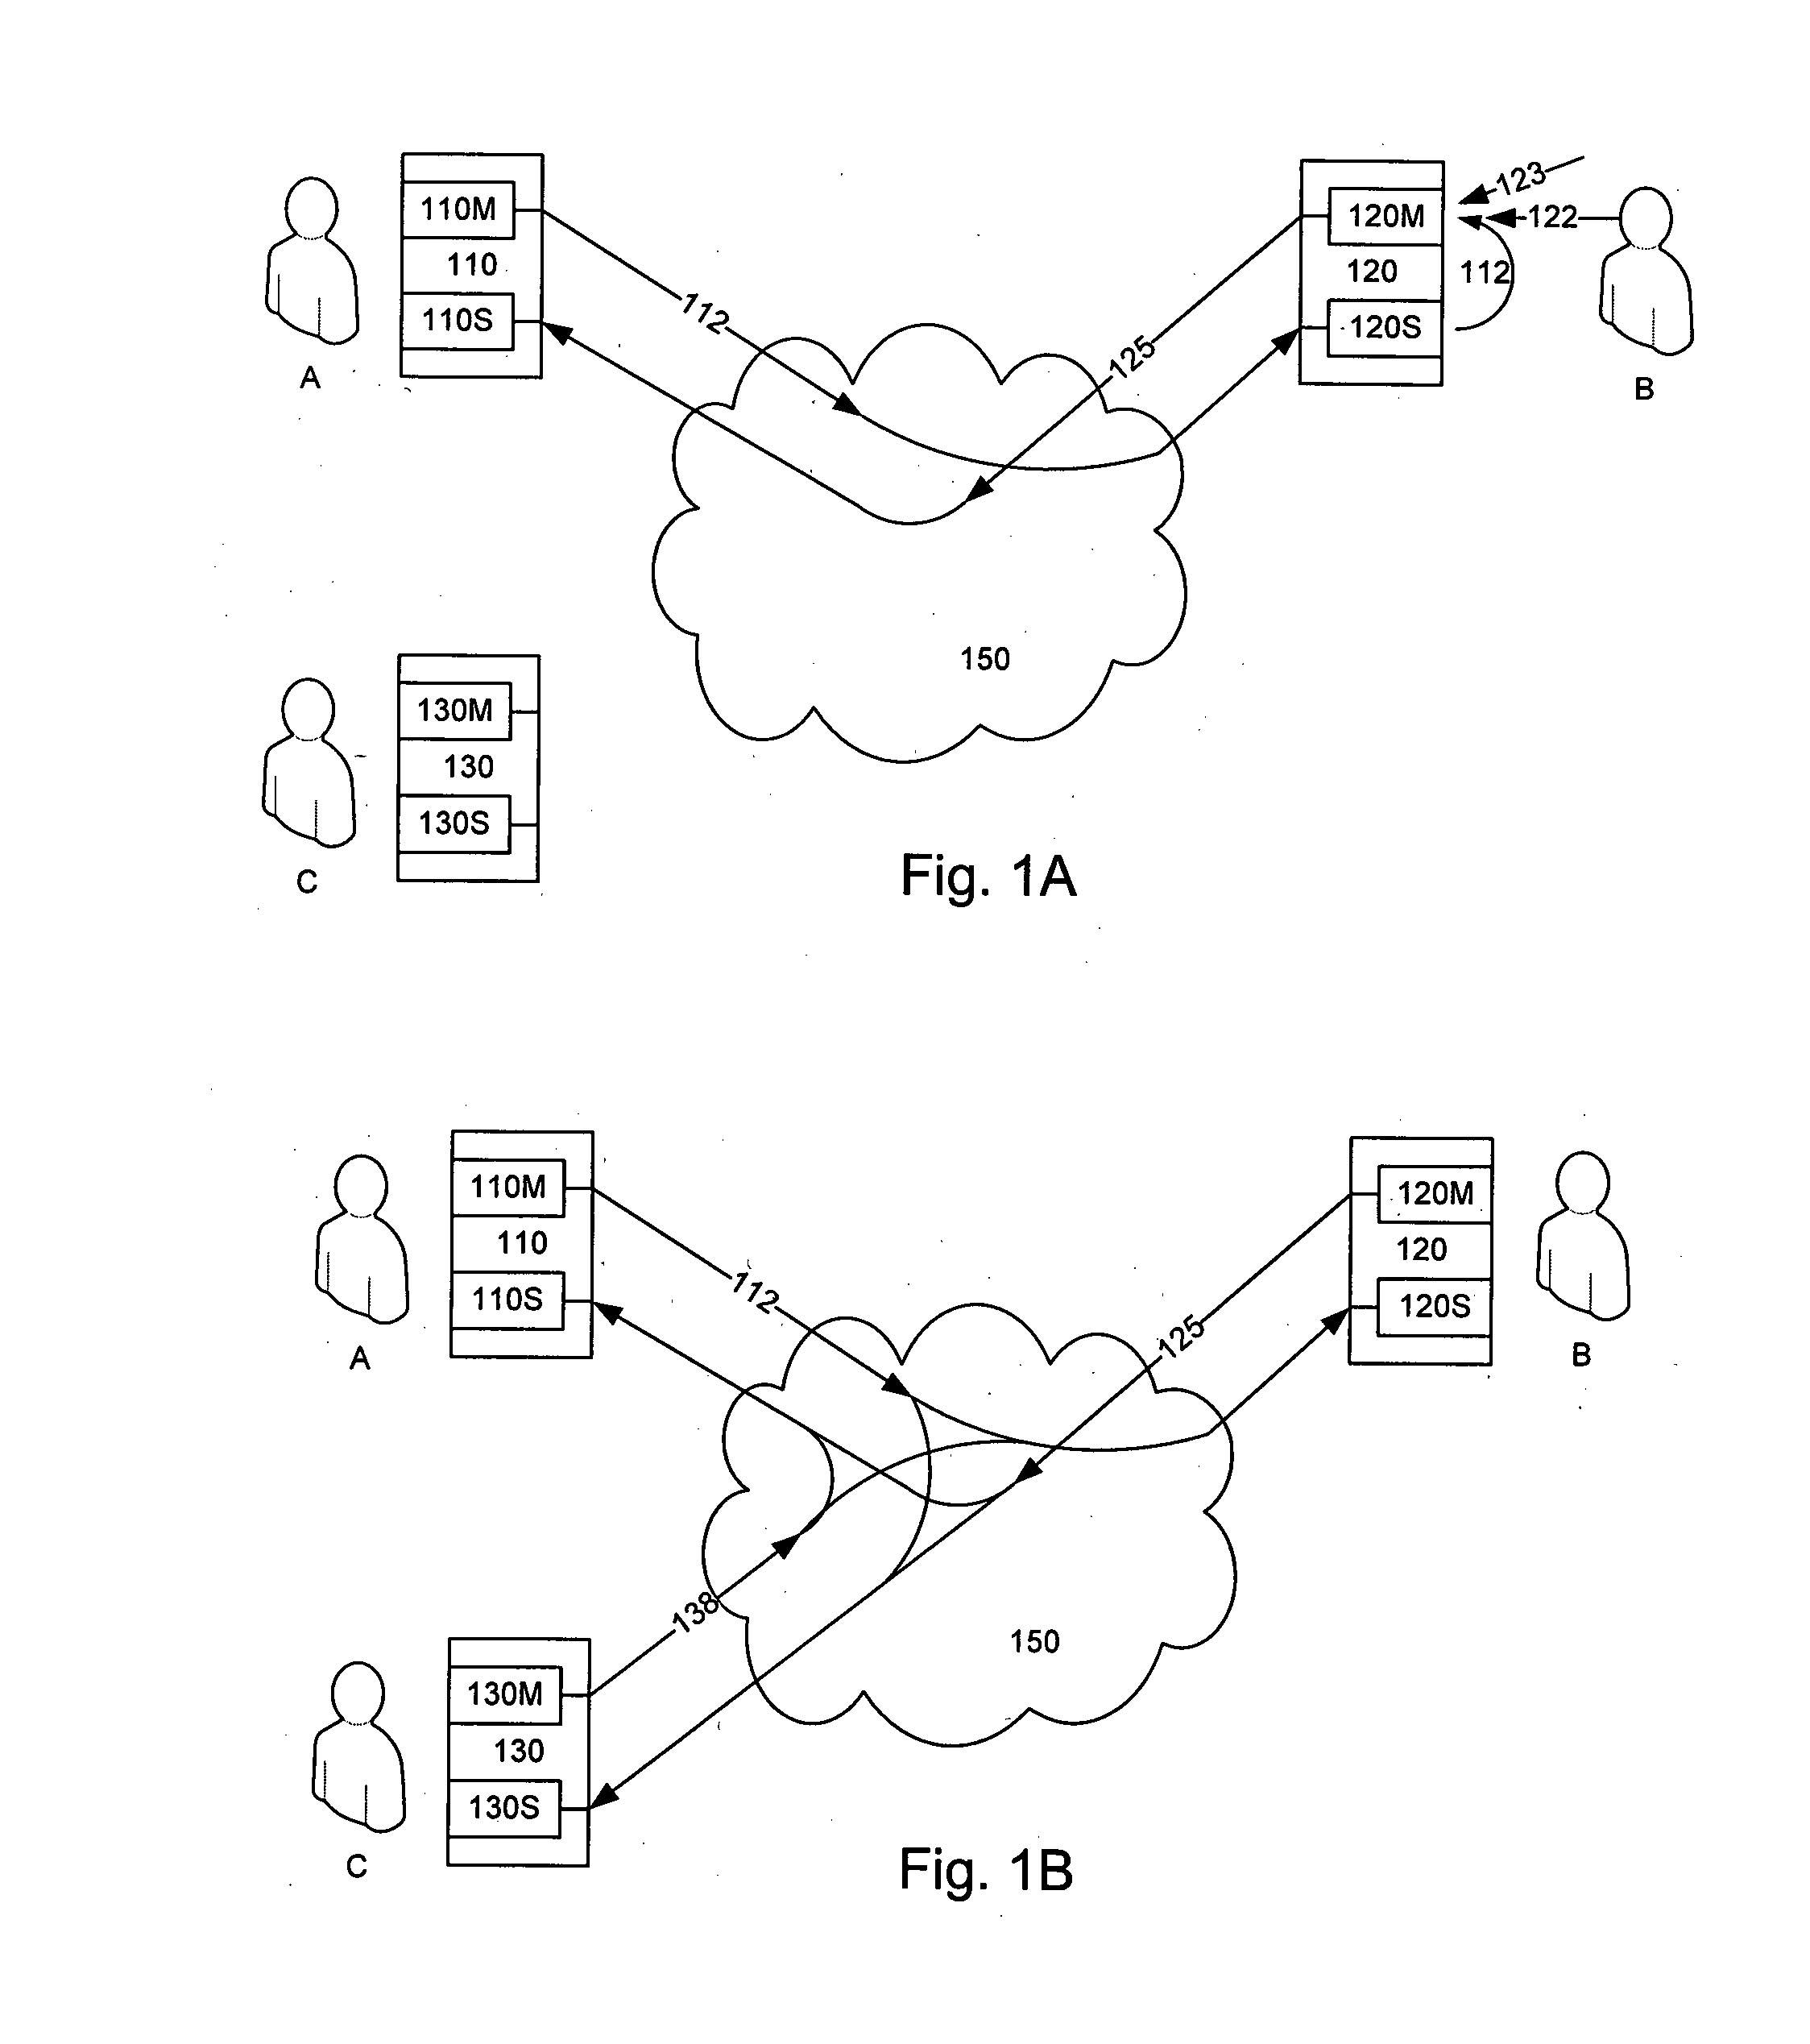 Audio Acoustic Echo Cancellation for Video Conferencing